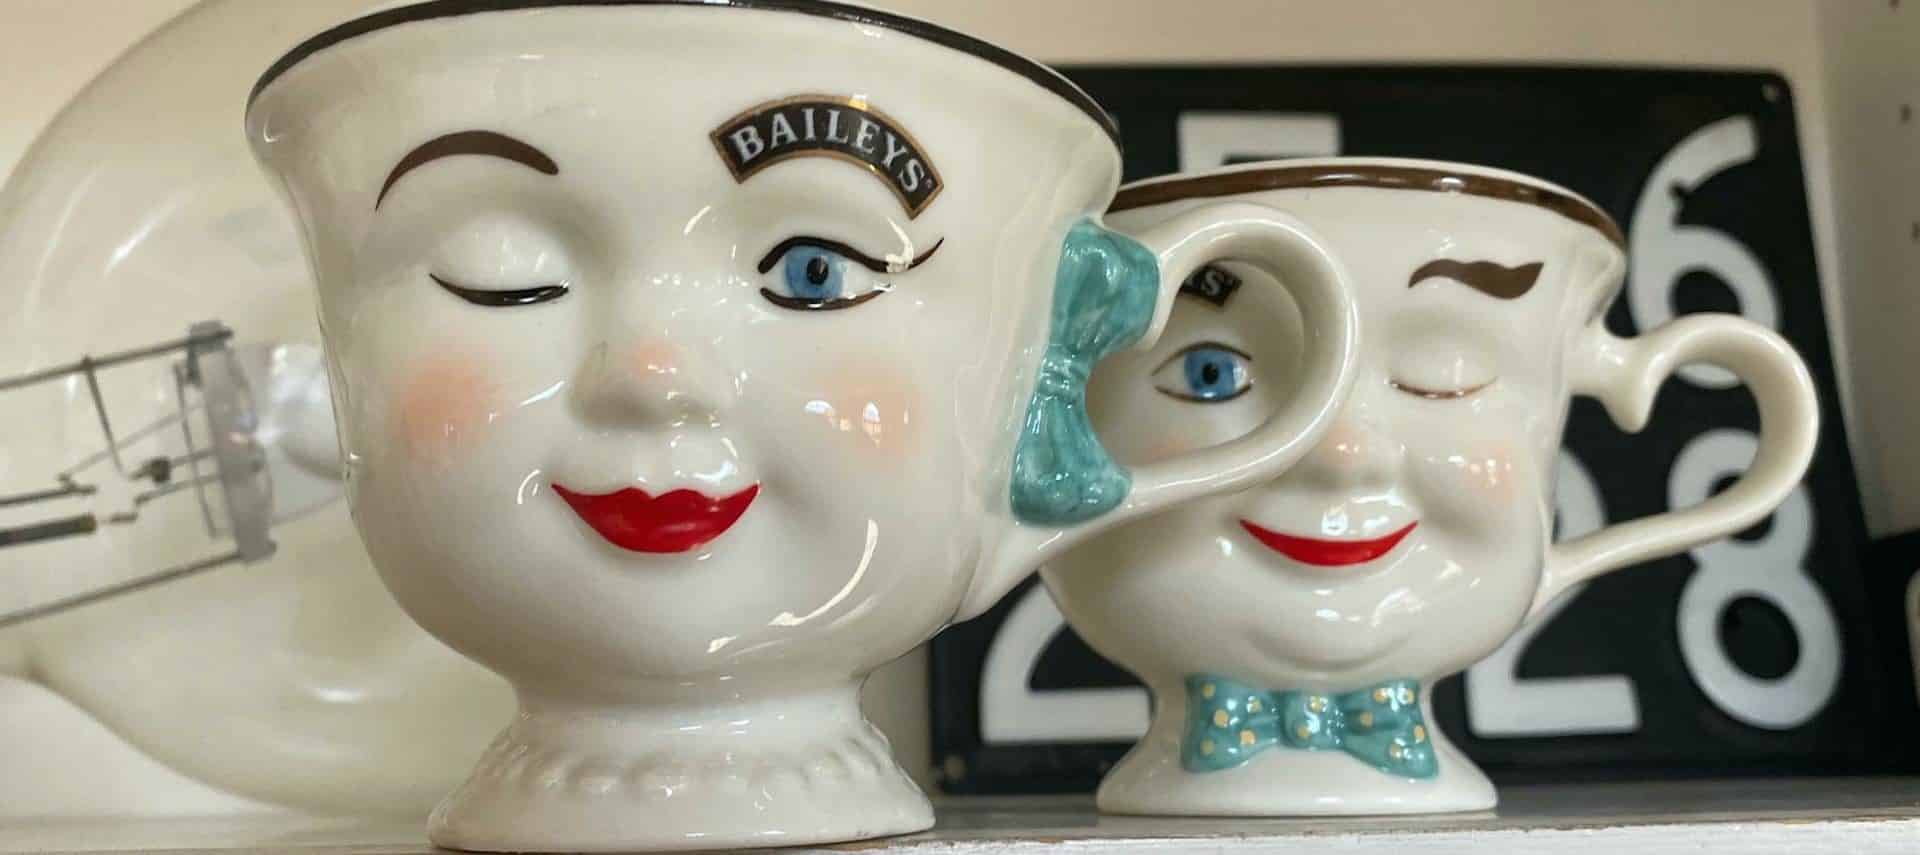 Close up view of handpainted teacups shaped as winking girl and boy faces